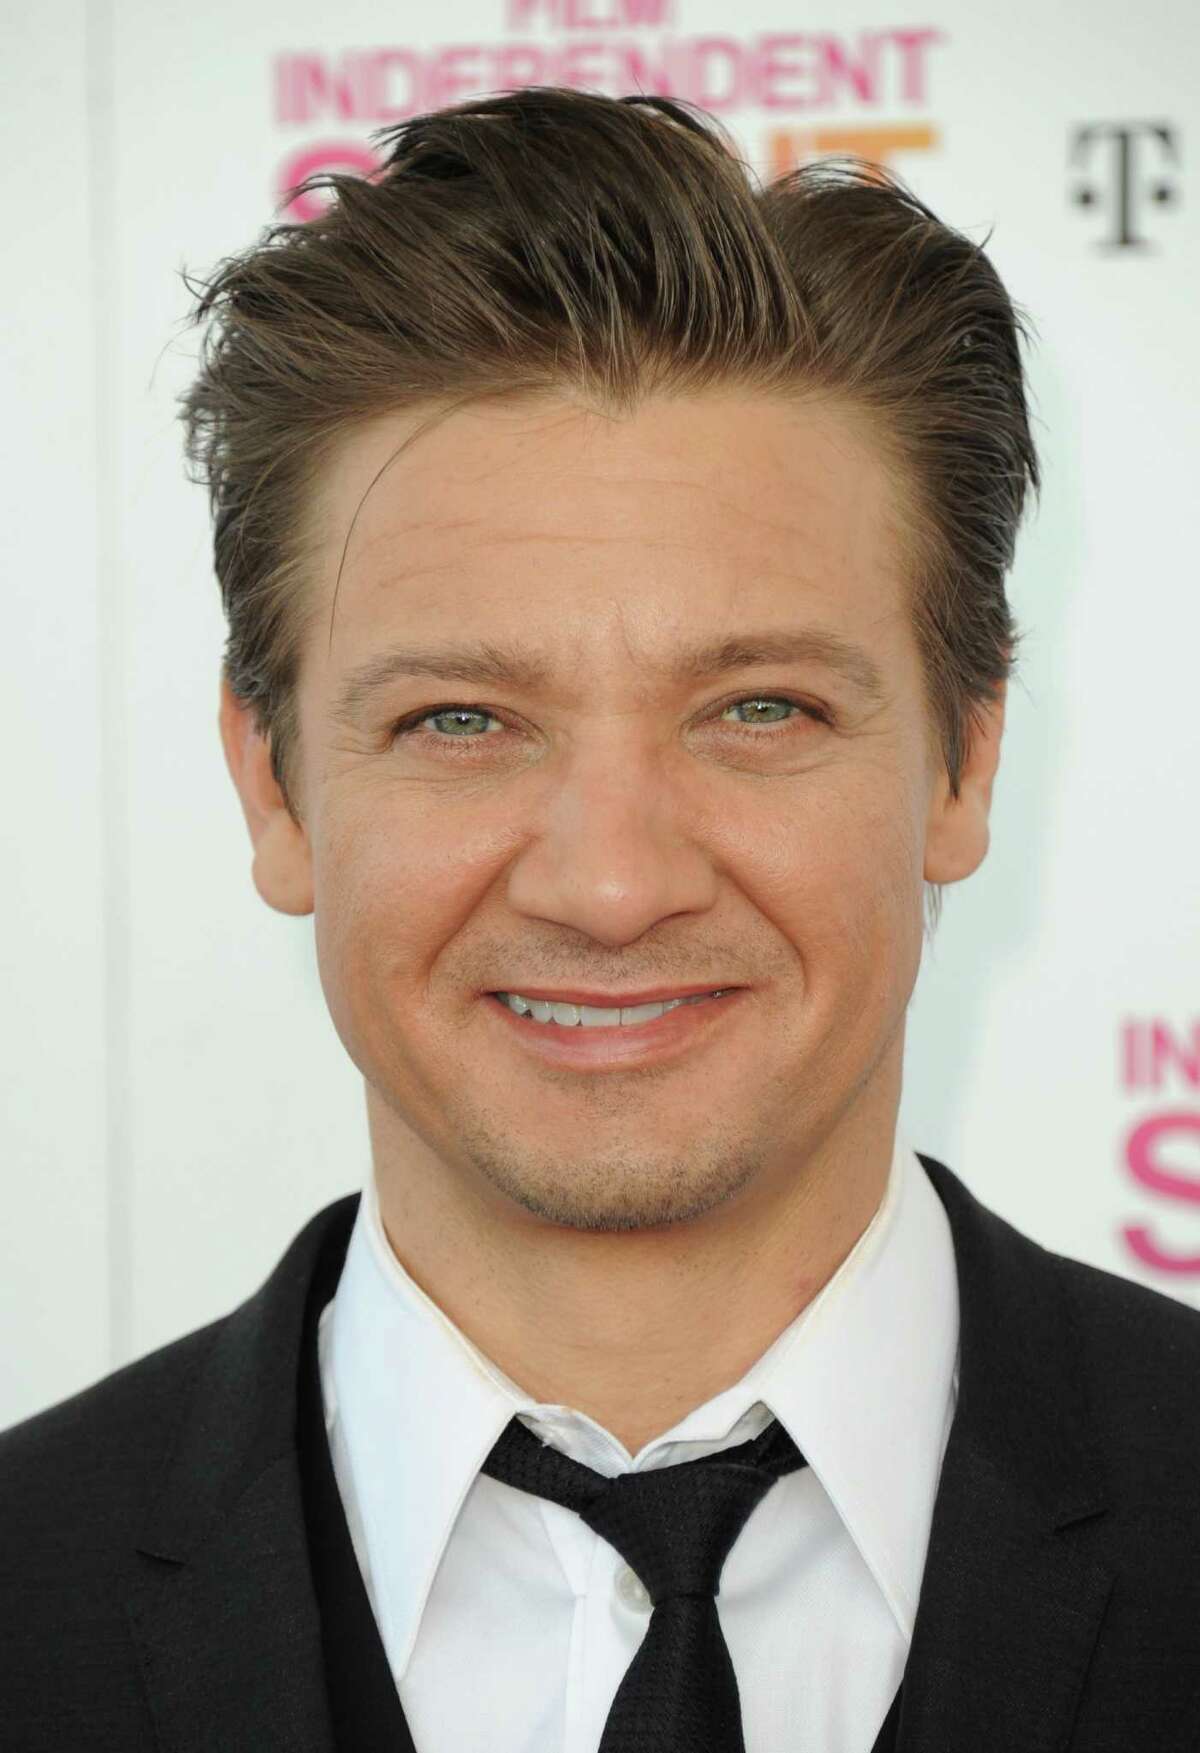 Actor Jeremy Renner arrives at the Independent Spirit Awards on Saturday, Feb. 23, 2013, in Santa Monica, Calif. (Photo by Jordan Strauss/Invision/AP)